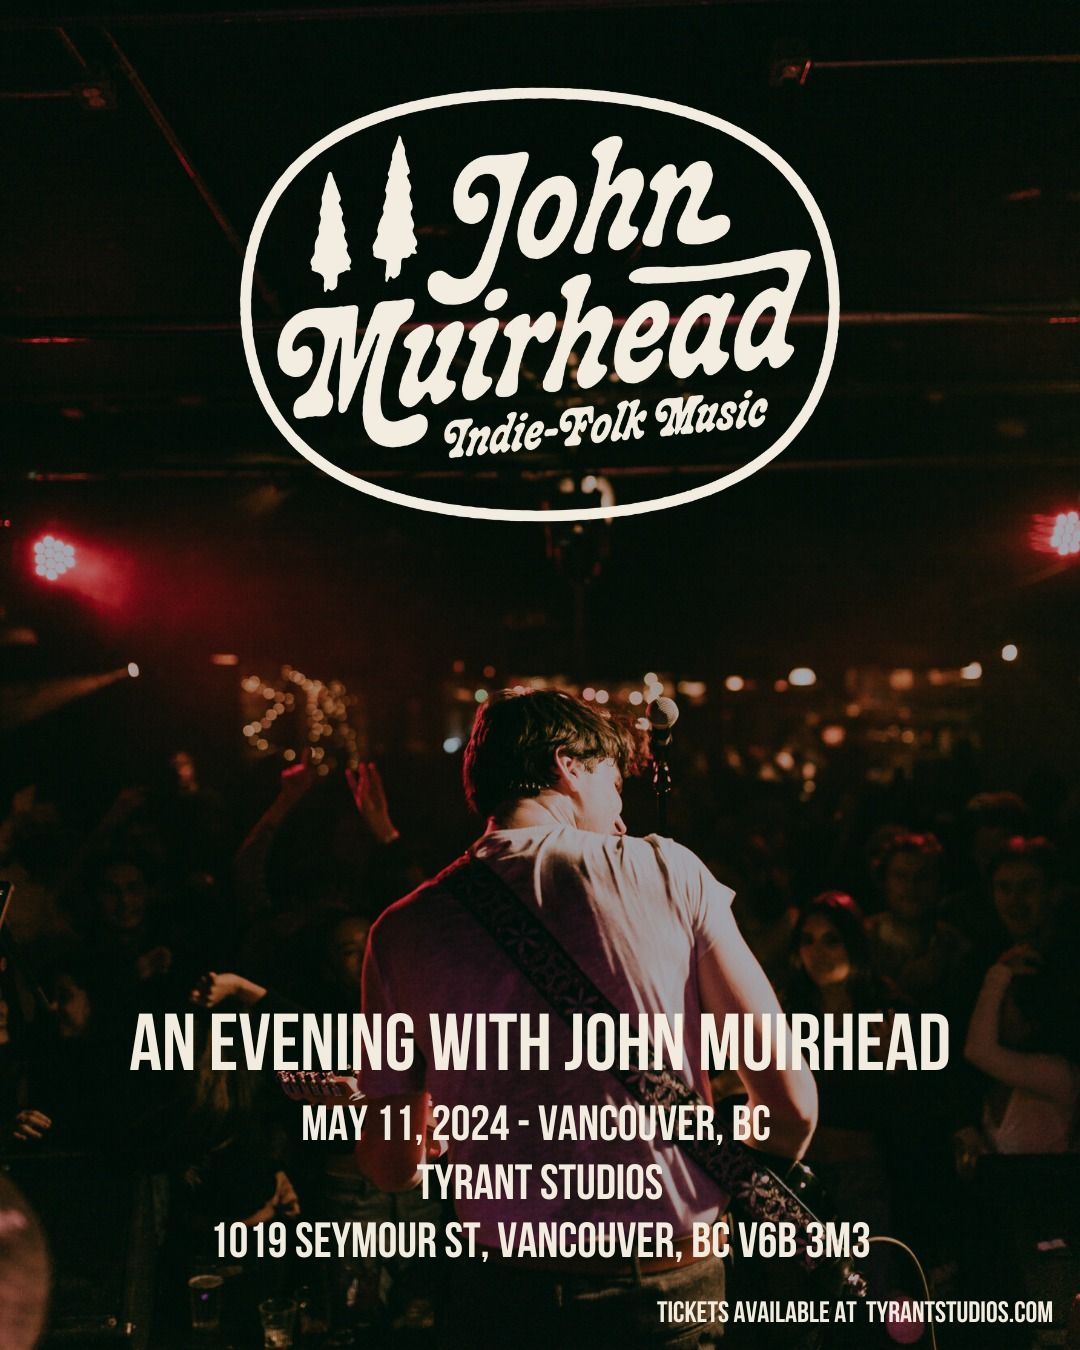 John Muirhead Live in Vancouver, BC 